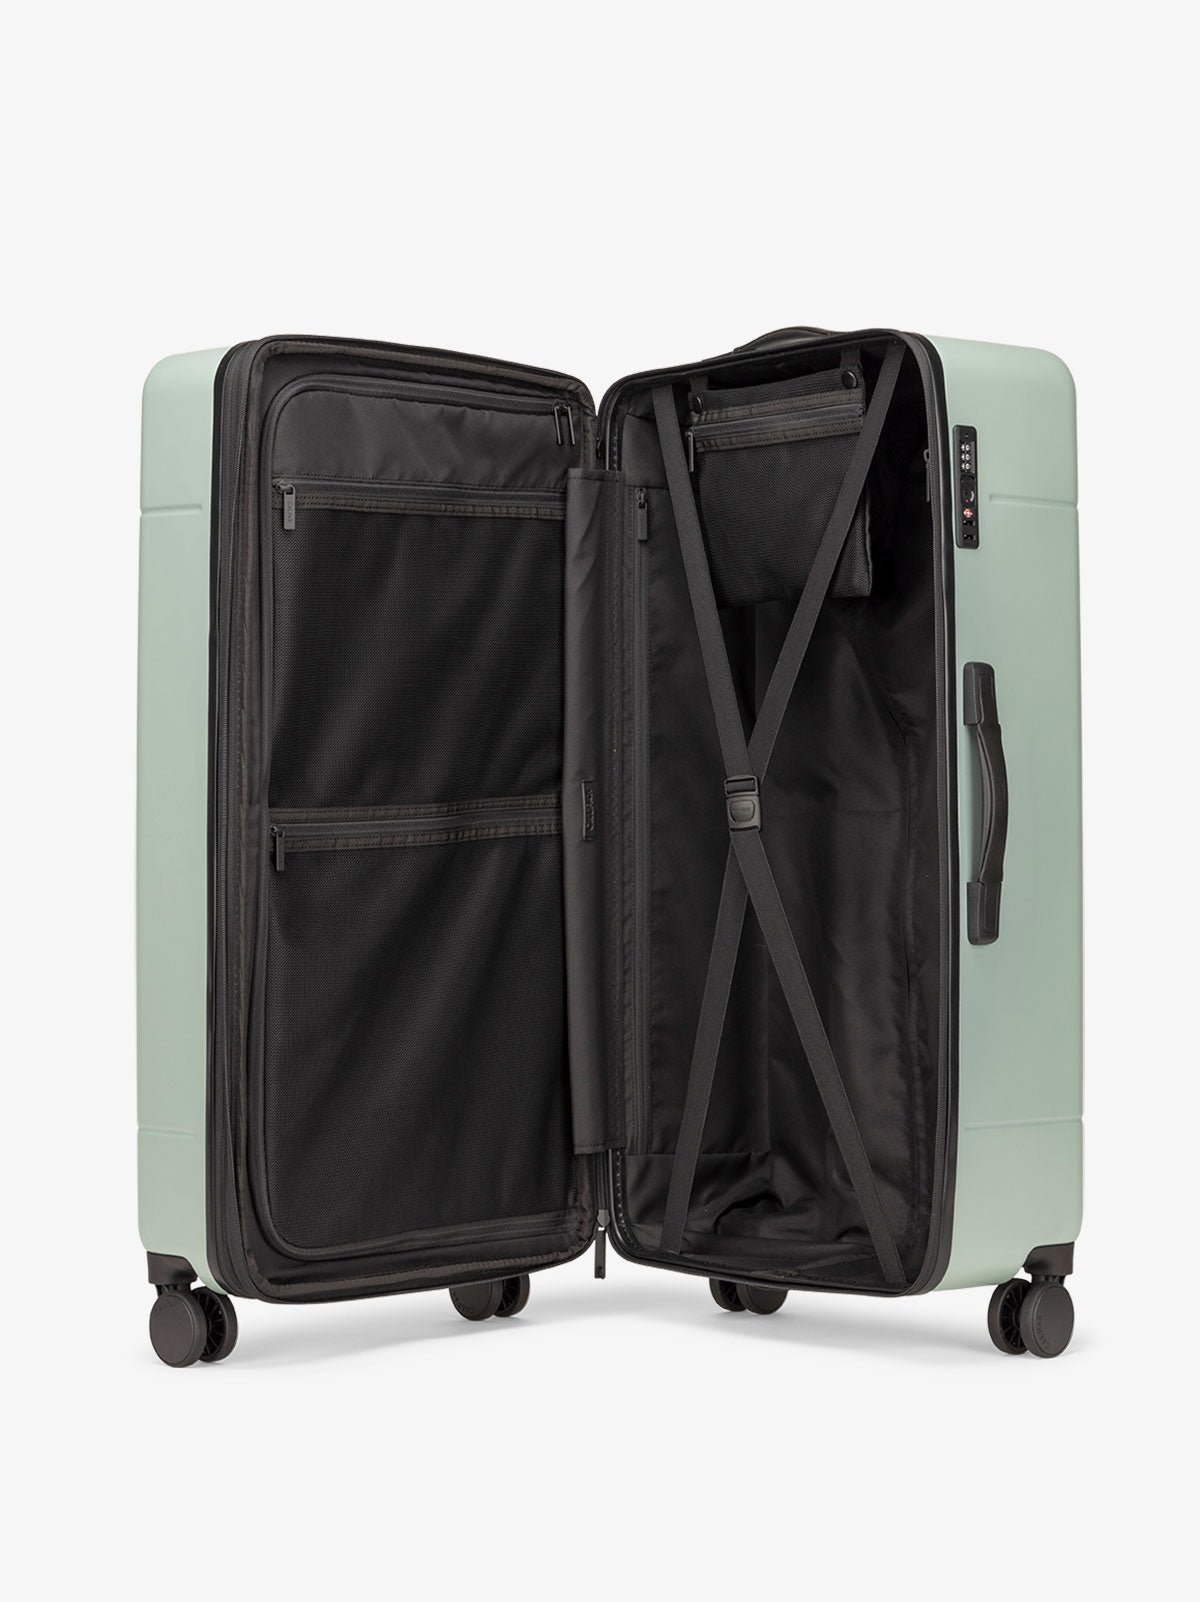 Hue trunk suitcase in light green jade with compression straps